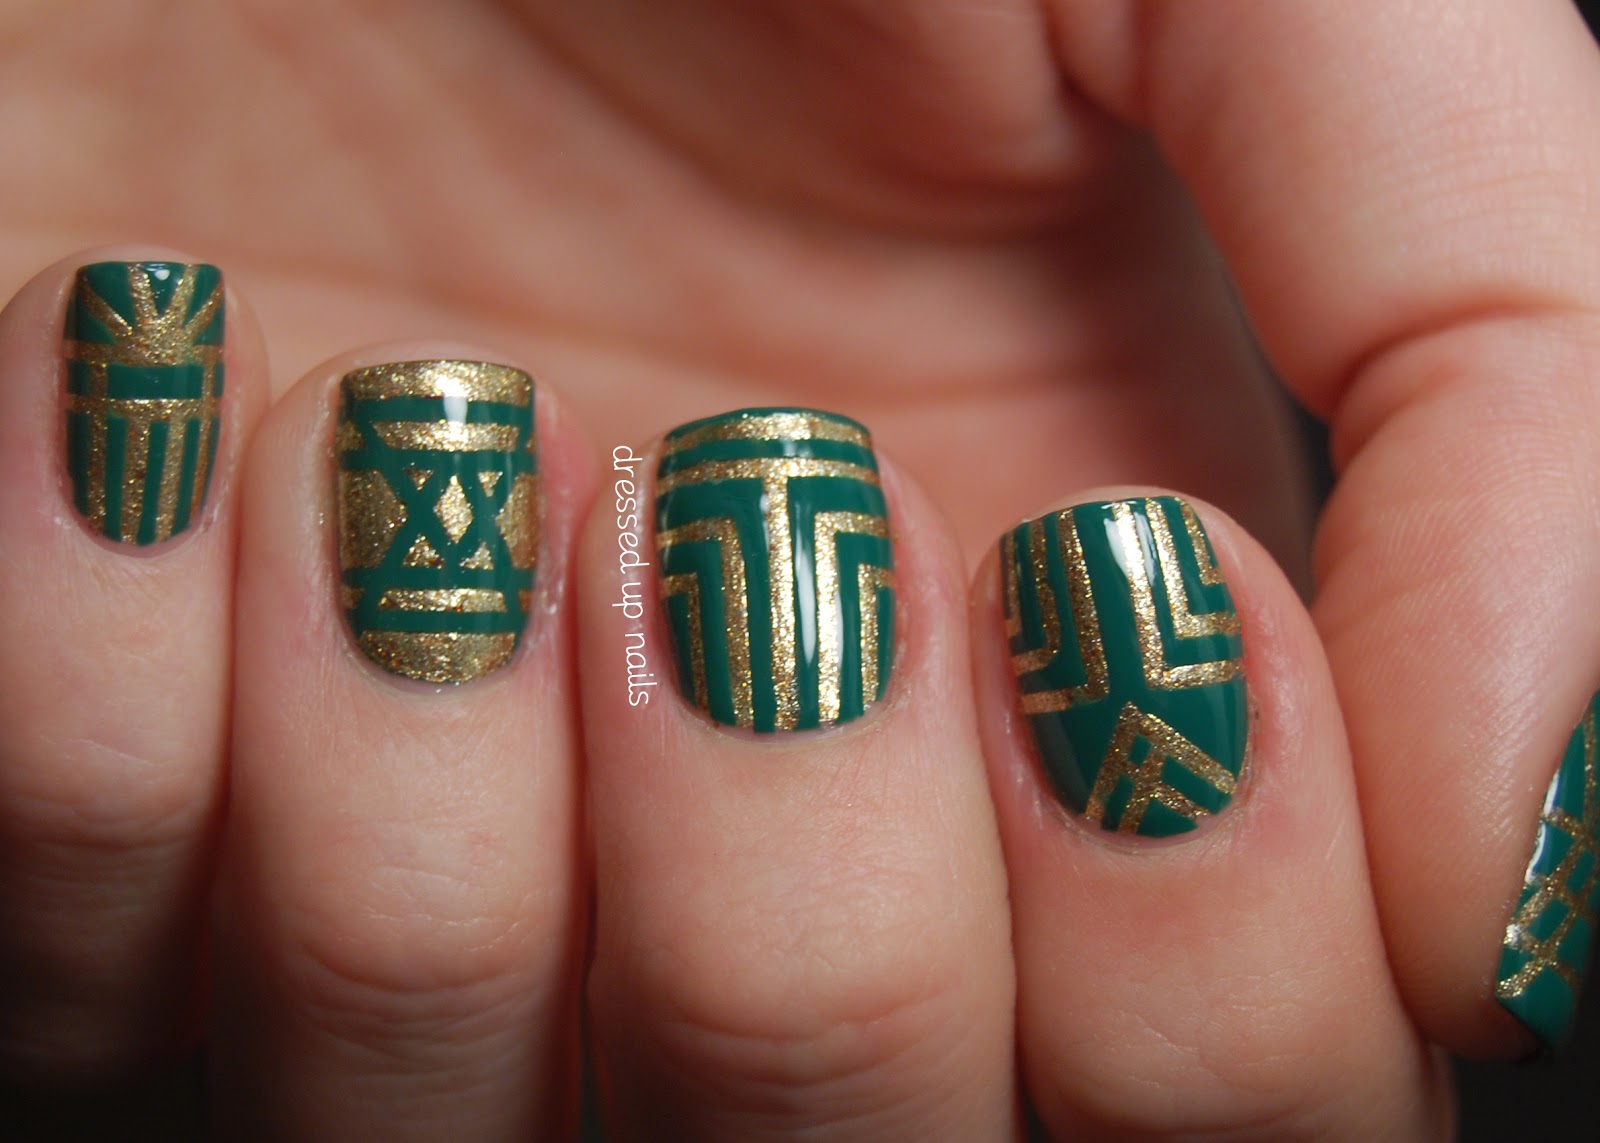 5. Unique Striping Tape Nail Art Inspiration - wide 2